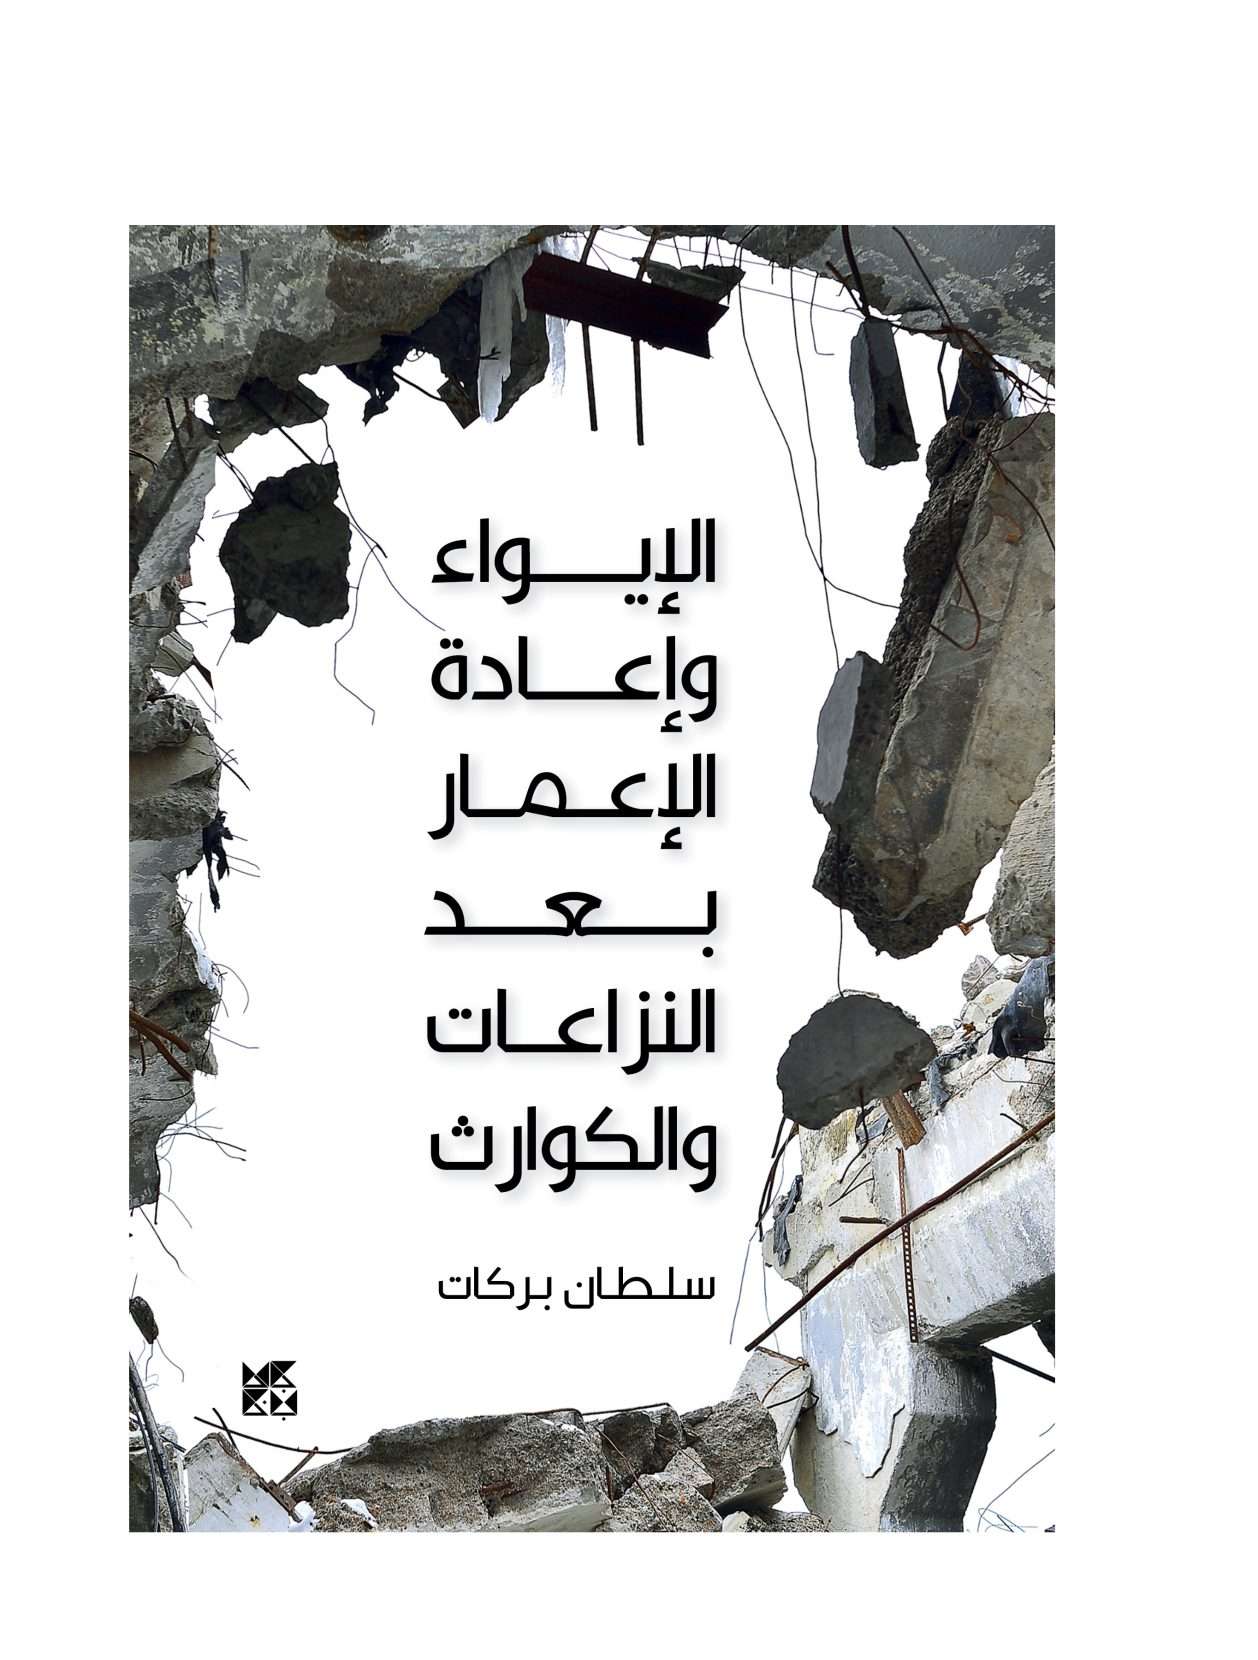 Shelter and Reconstruction Post-Conflicts and Disasters – Arabic